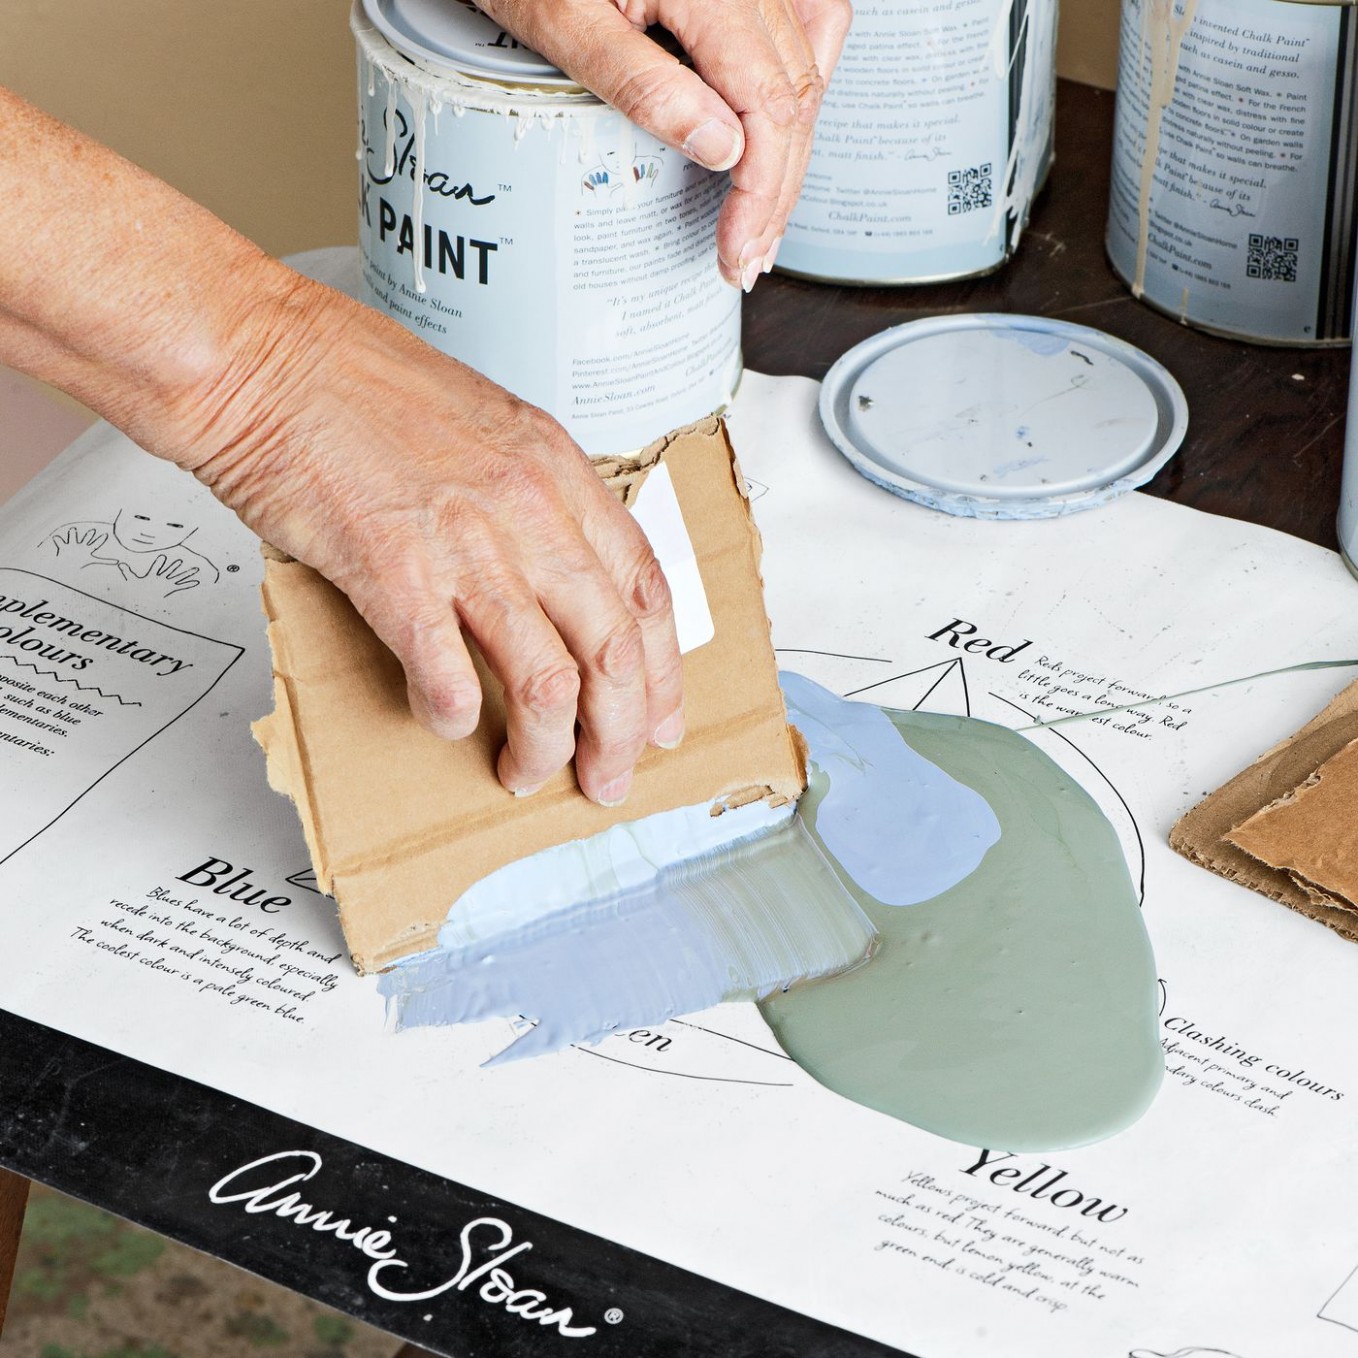 How To Rough Up A Wall With Paint This Old House Annie Sloan Chalk Paint Reers Online